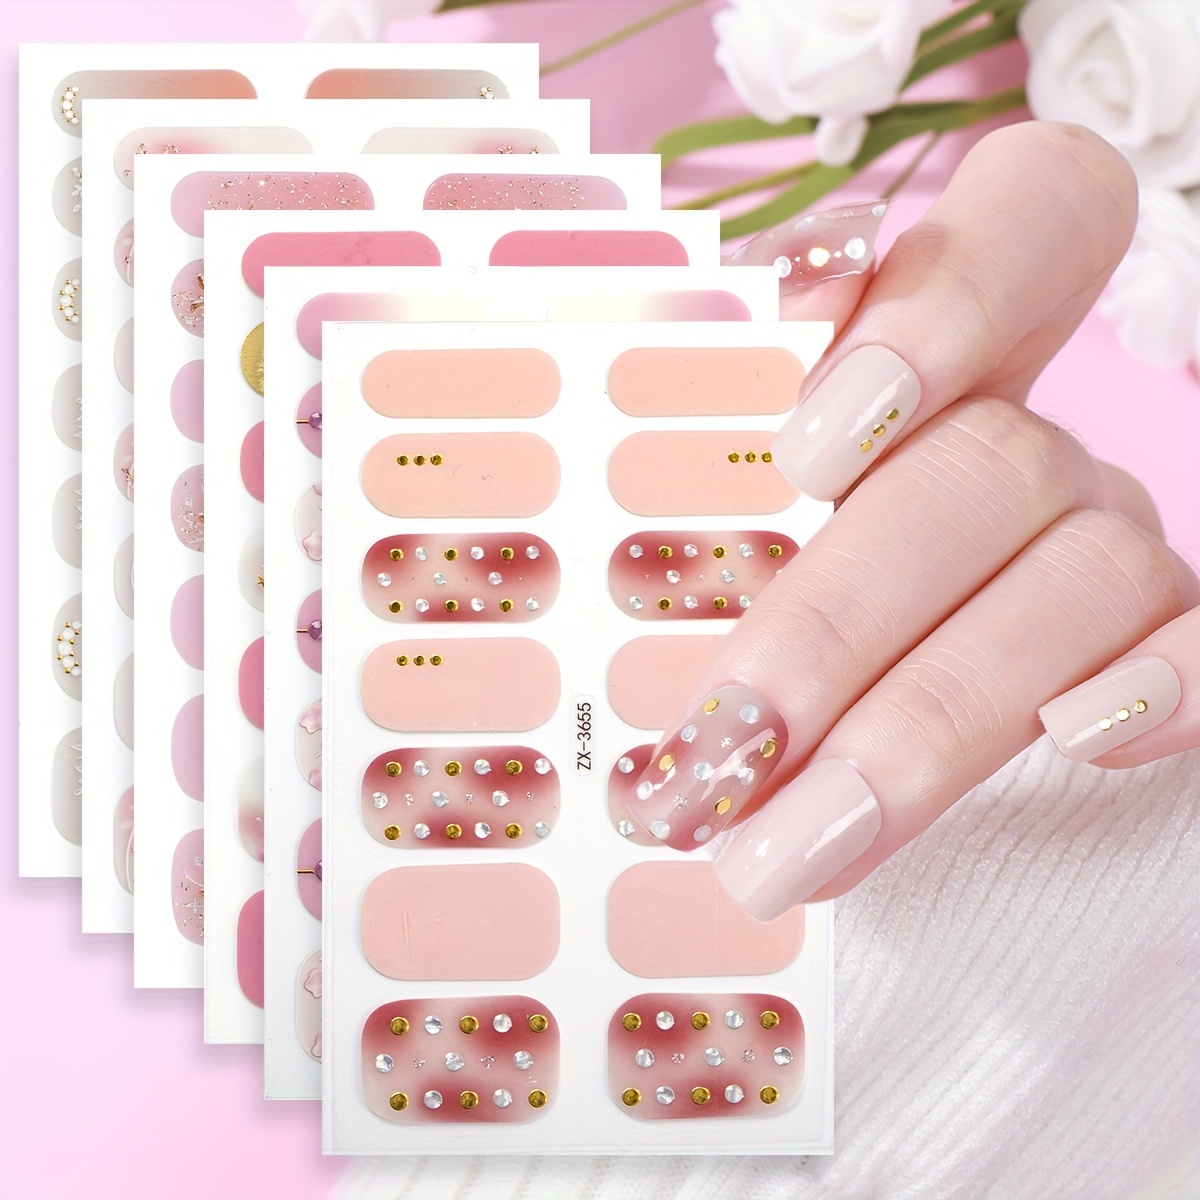 

6-piece Sparkling 3d Art Stickers - Pink Star & Moon Designs, Self-adhesive Full Coverage Decals For Easy Diy Manicures